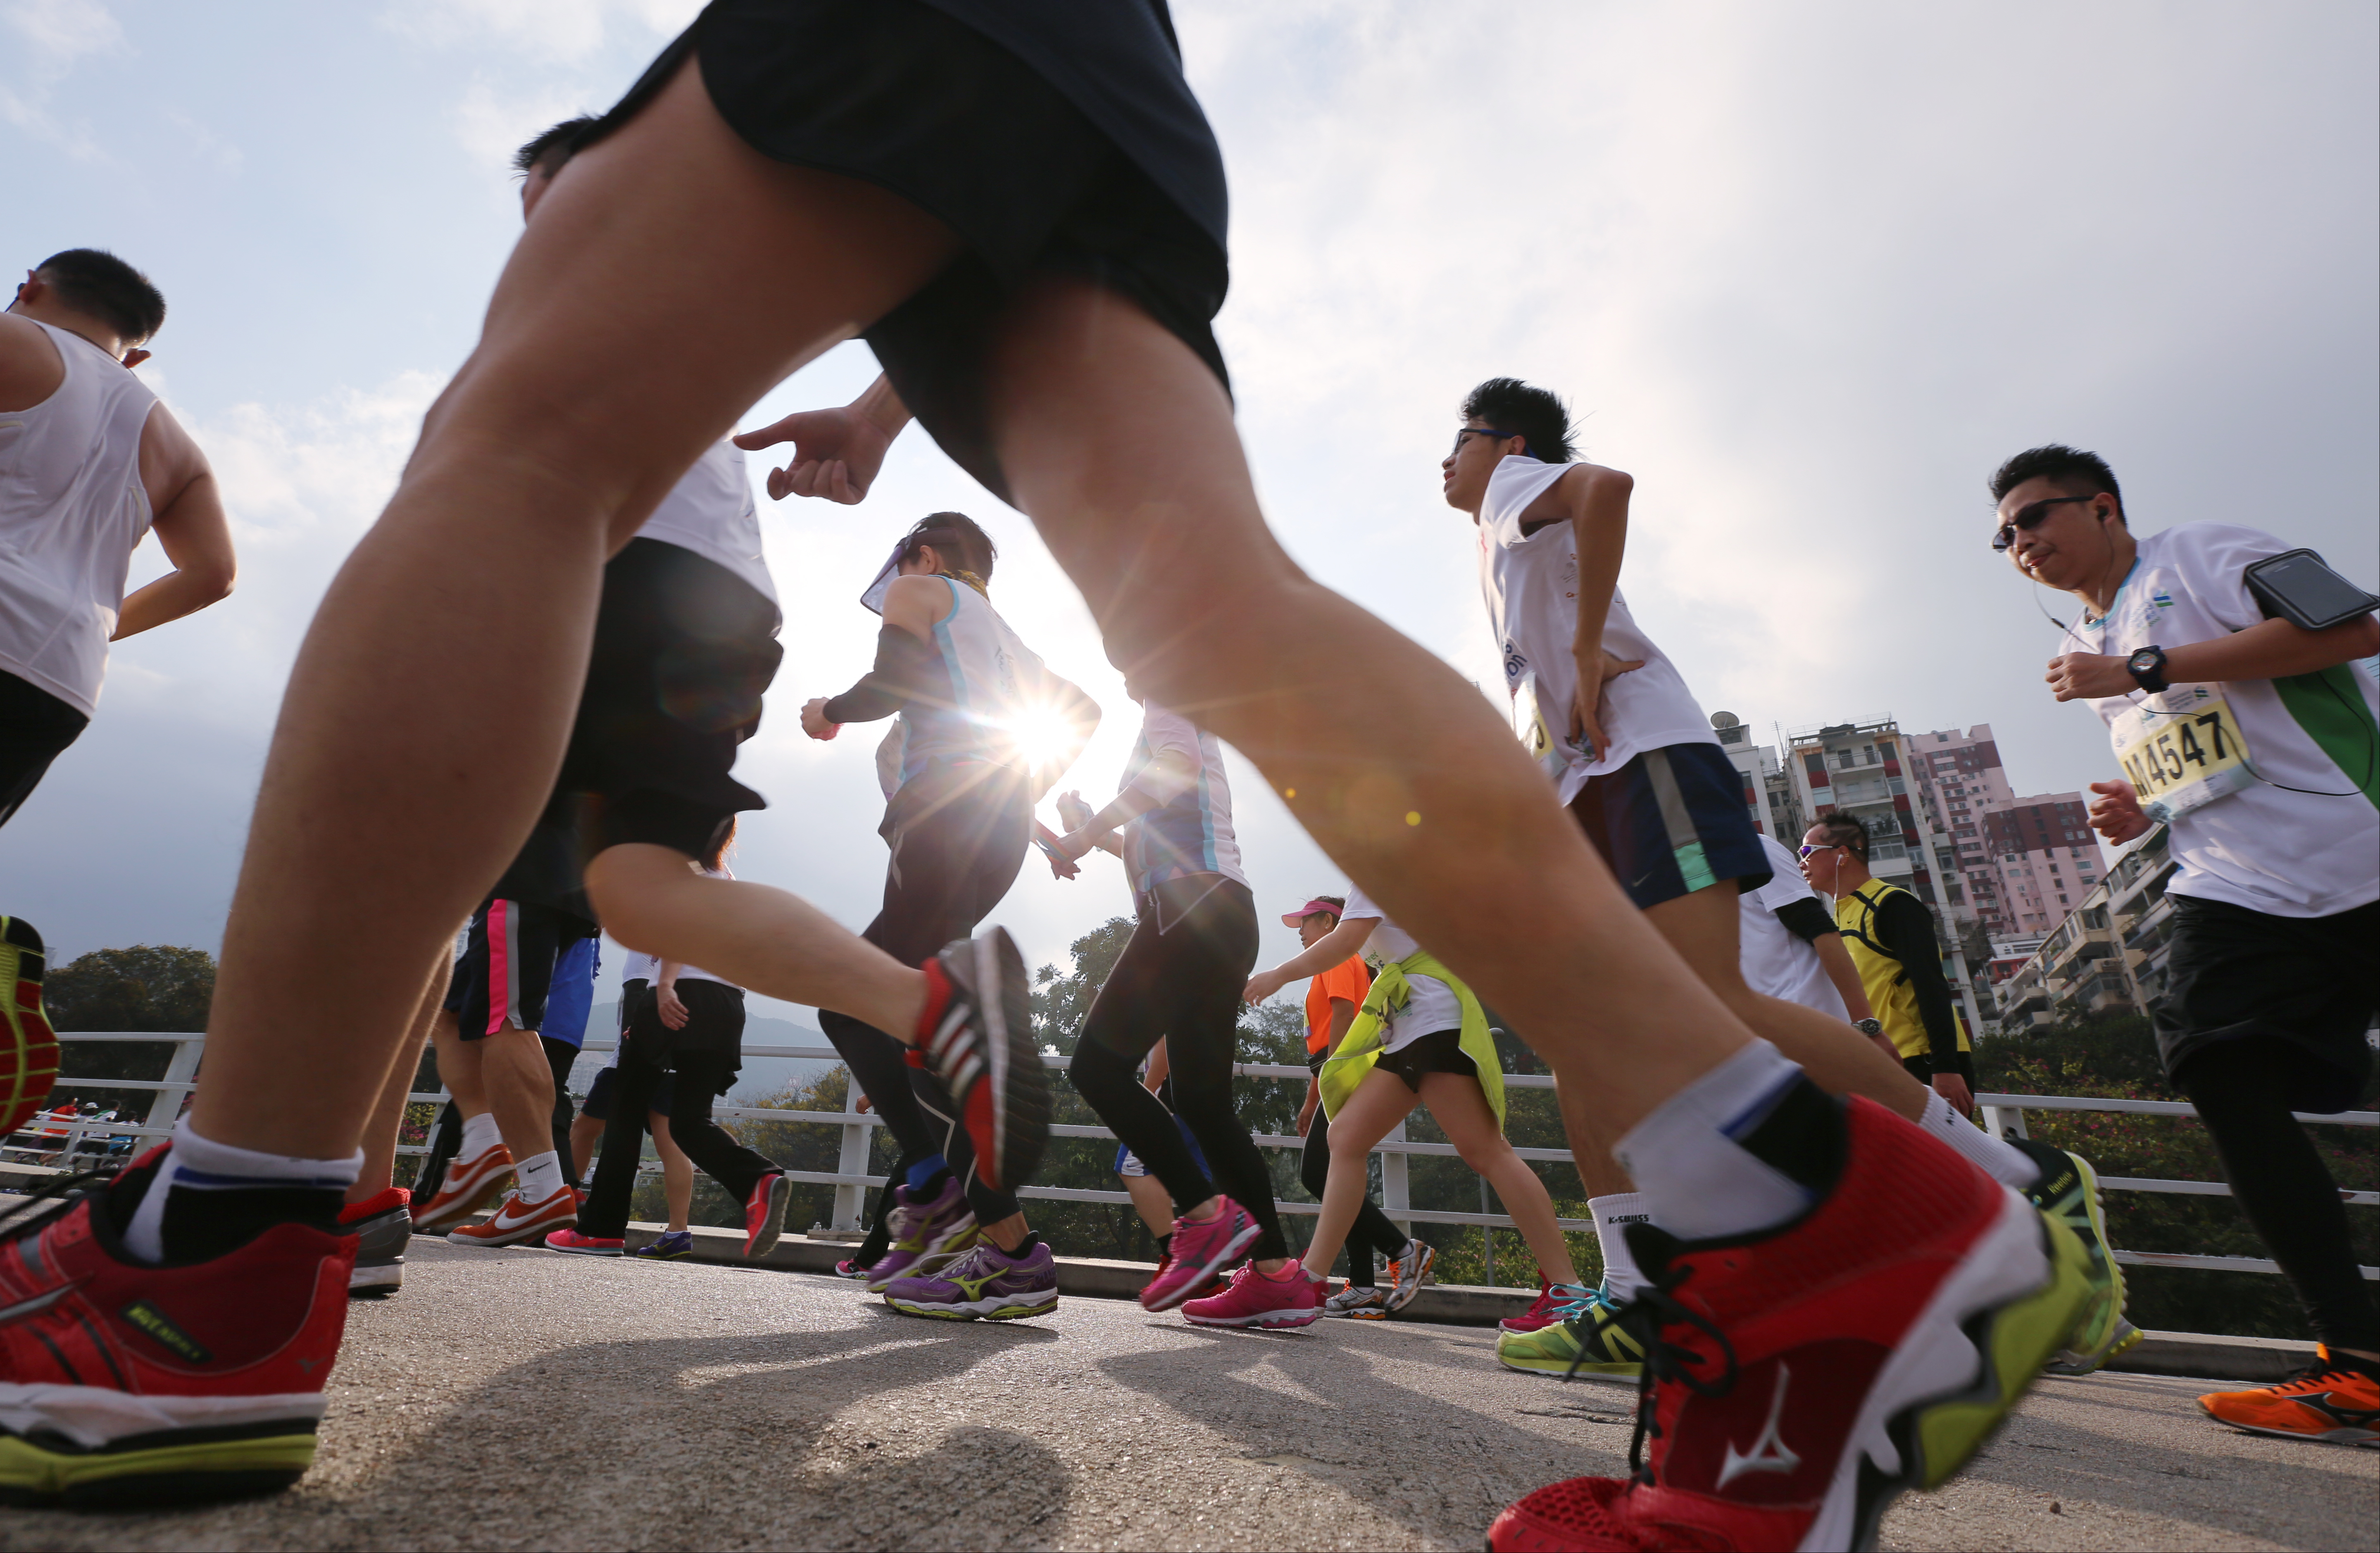 Runners compete in the in the annual Standard Chartered Hong Kong Marathon. Photo: Felix Wong